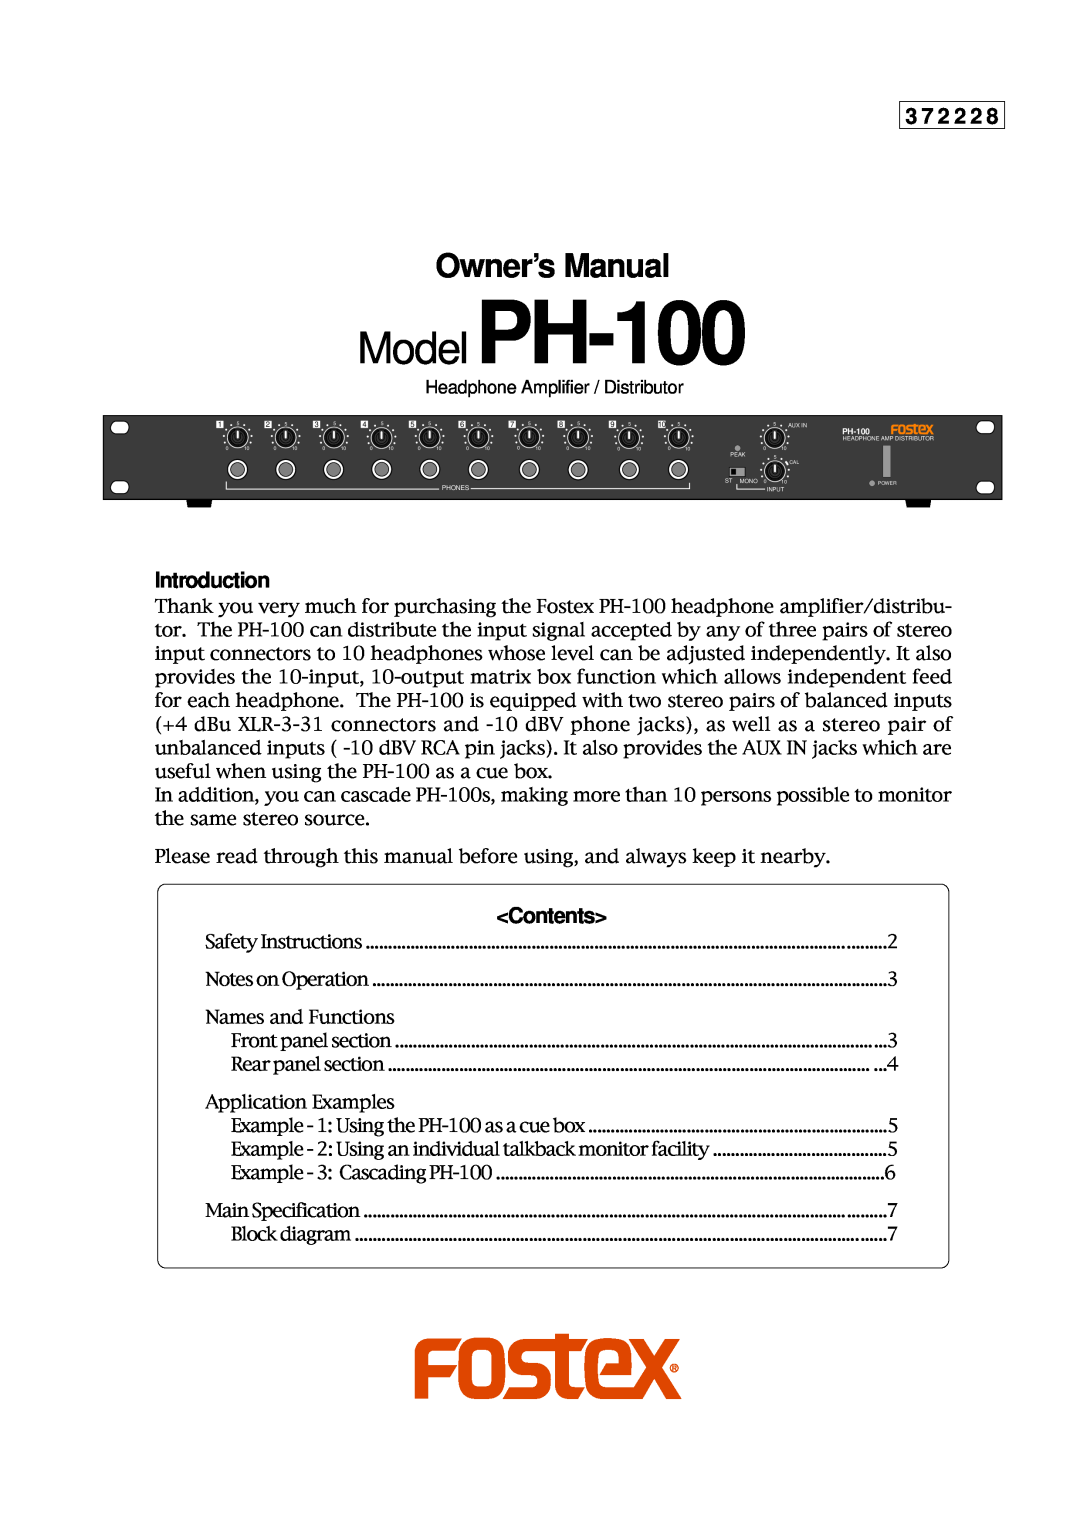 Fostex owner manual Introduction, Contents, Model PH-100 